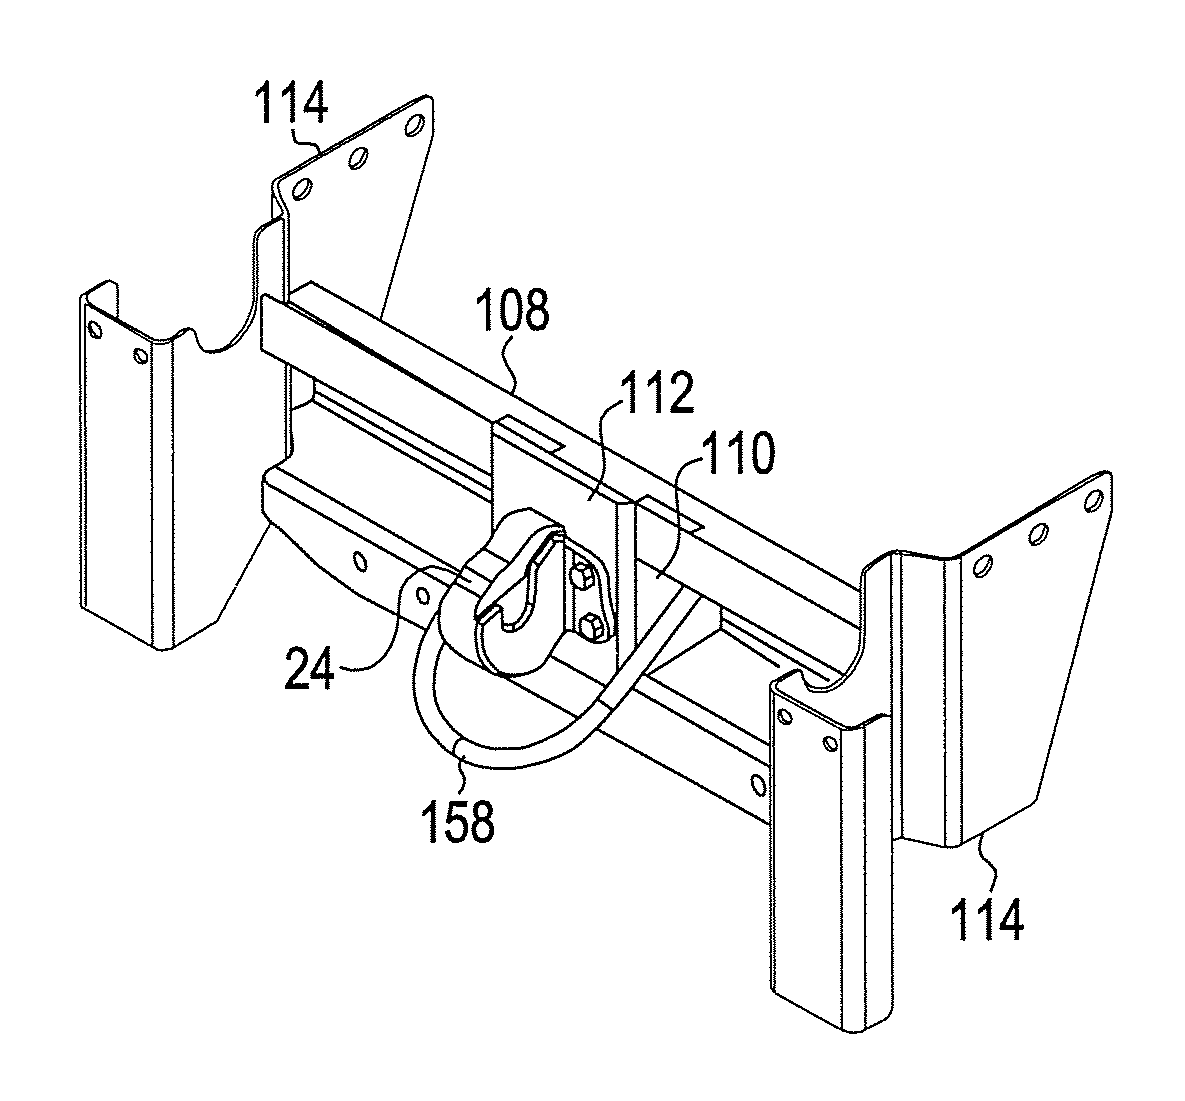 Integrated rear impact guard and pintle hook assembly